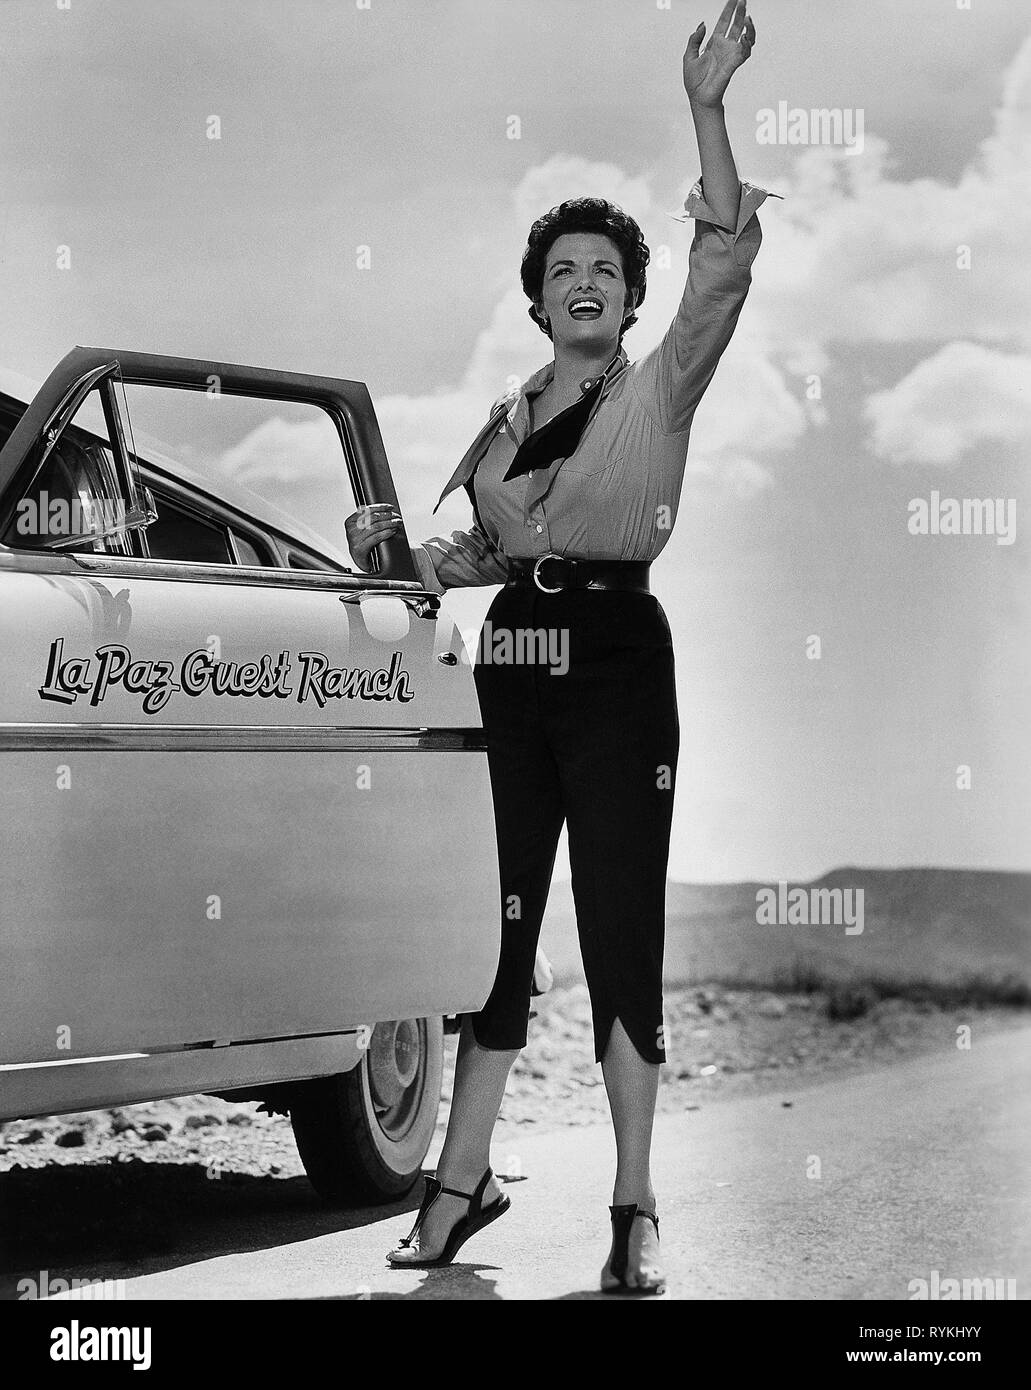 Photos of jane russell